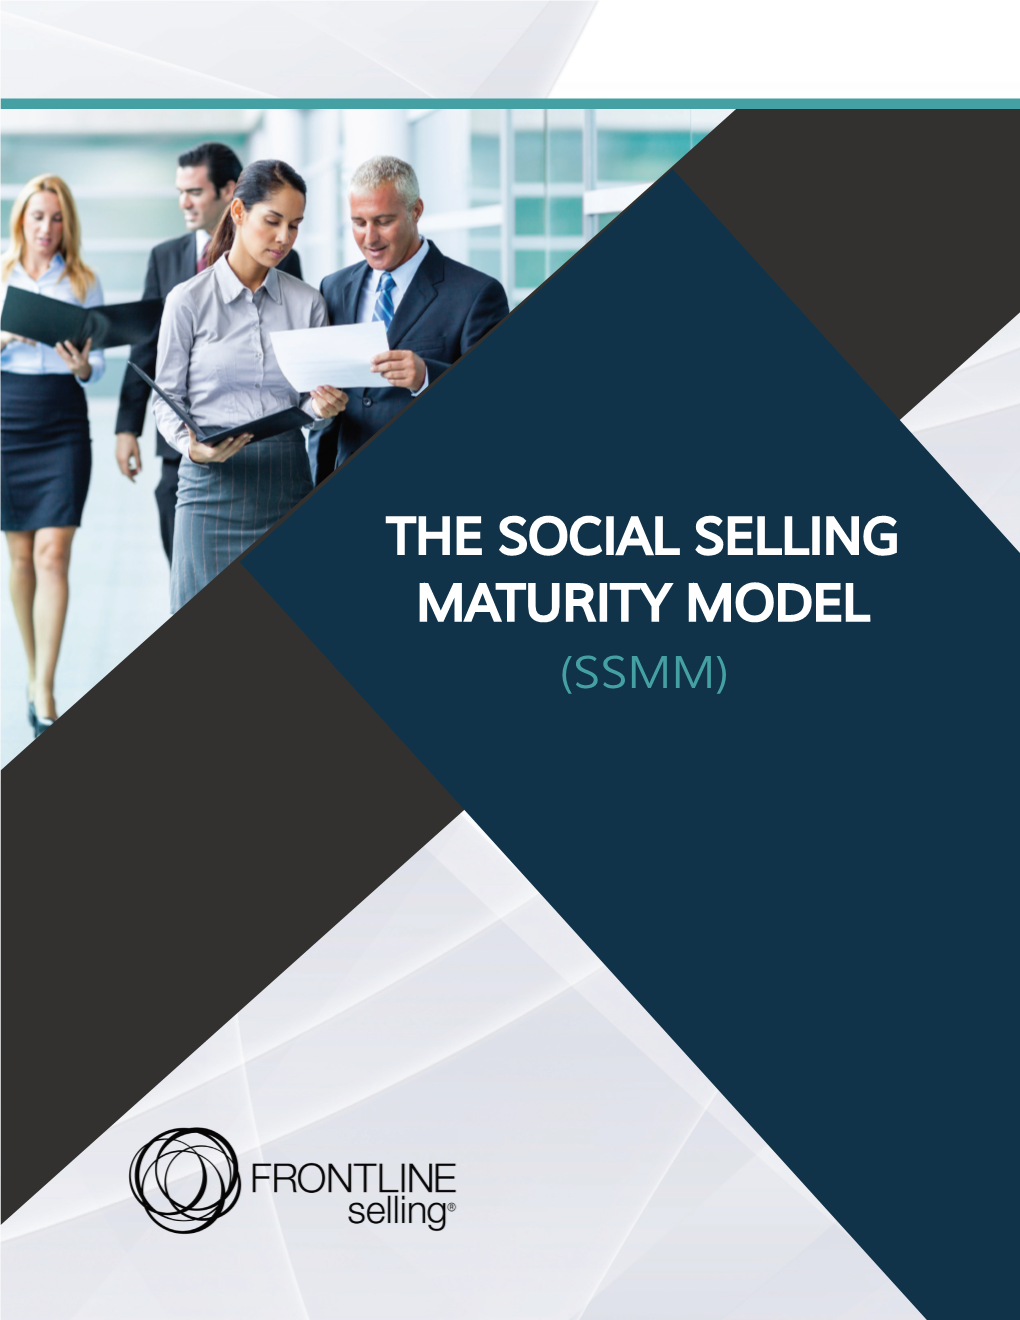 THE SOCIAL SELLING MATURITY MODEL (SSMM) the Social Selling Maturity Model (SSMM)